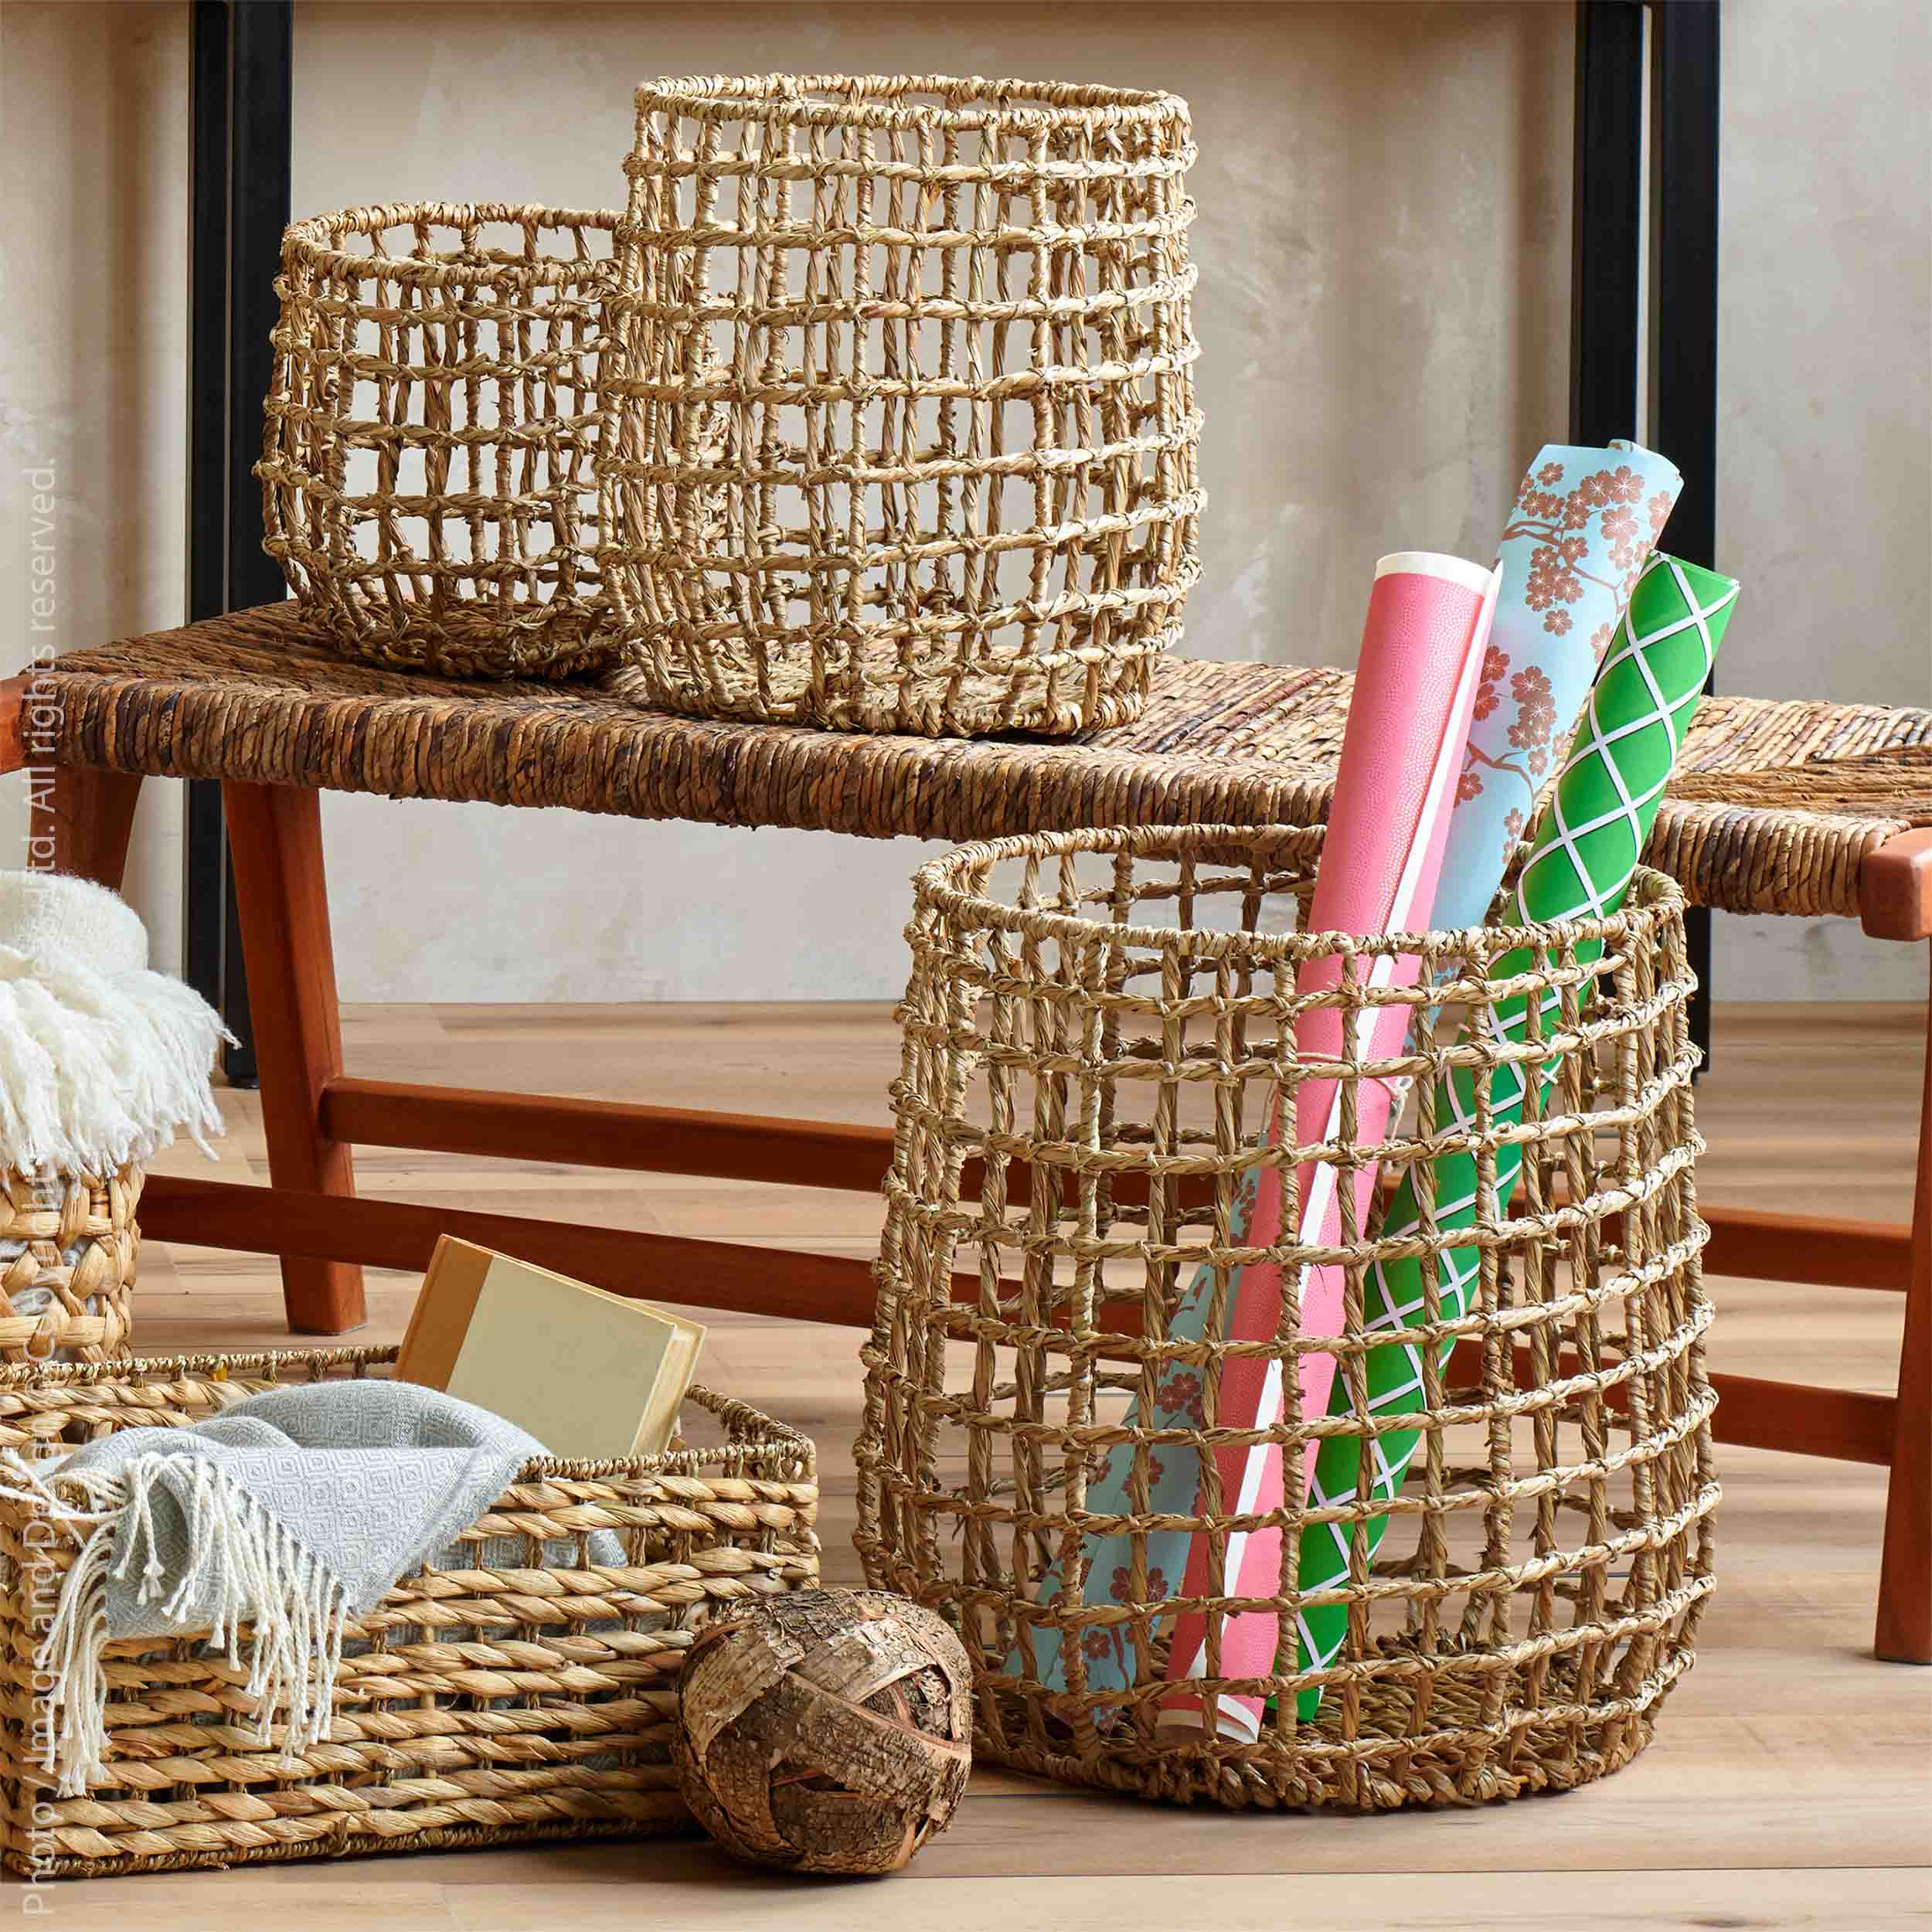 Set of Wicker Baskets for Home Organization, Water Hyacinth